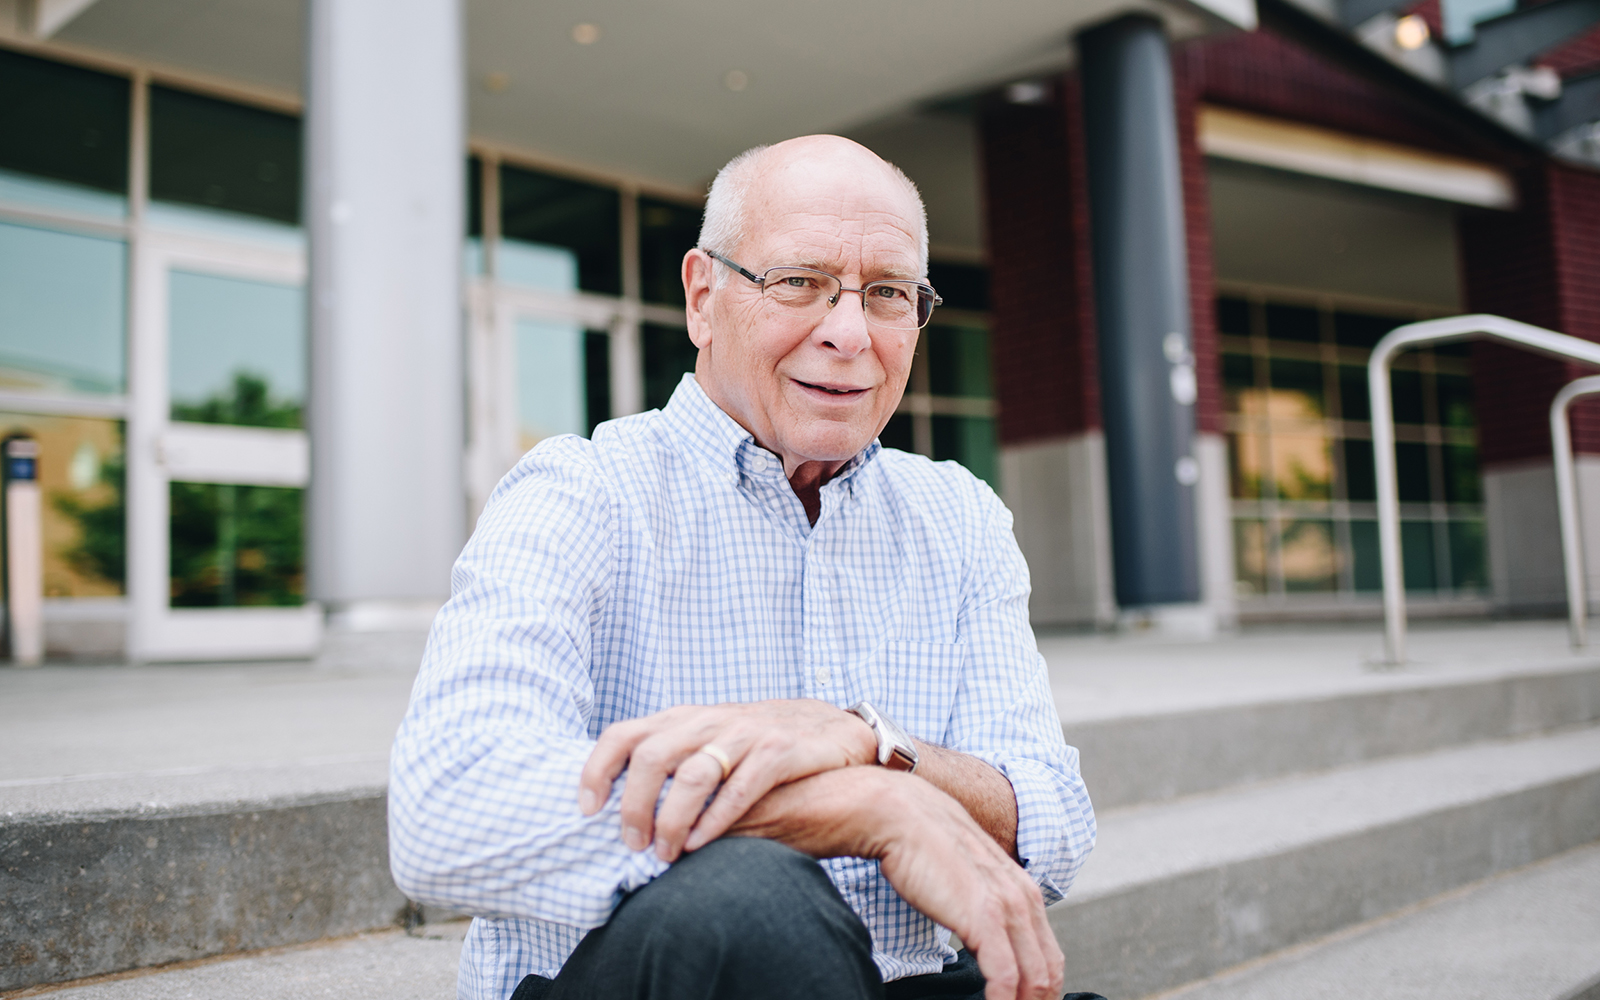 Professor John Clapp, pictured above, plans to continue his research into solutions for vacant Retail spaces (Nathan Oldham / UConn School of Business)